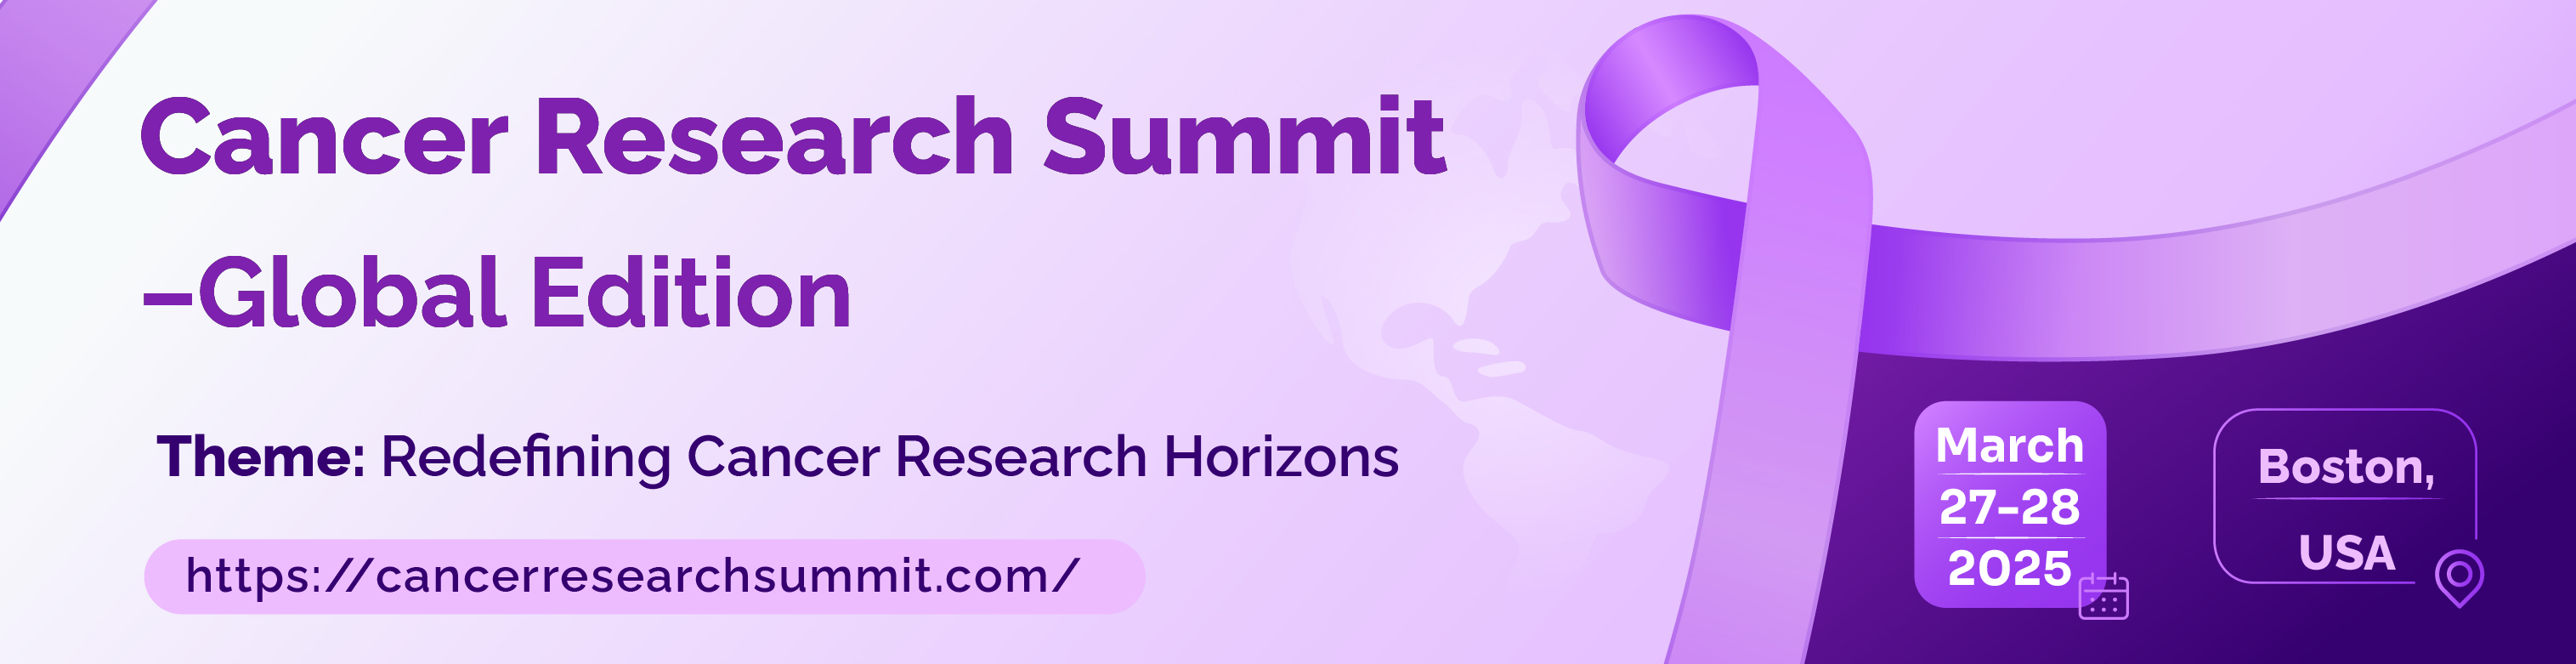 Cancer Research Summit – Global Edition, Boston, United States